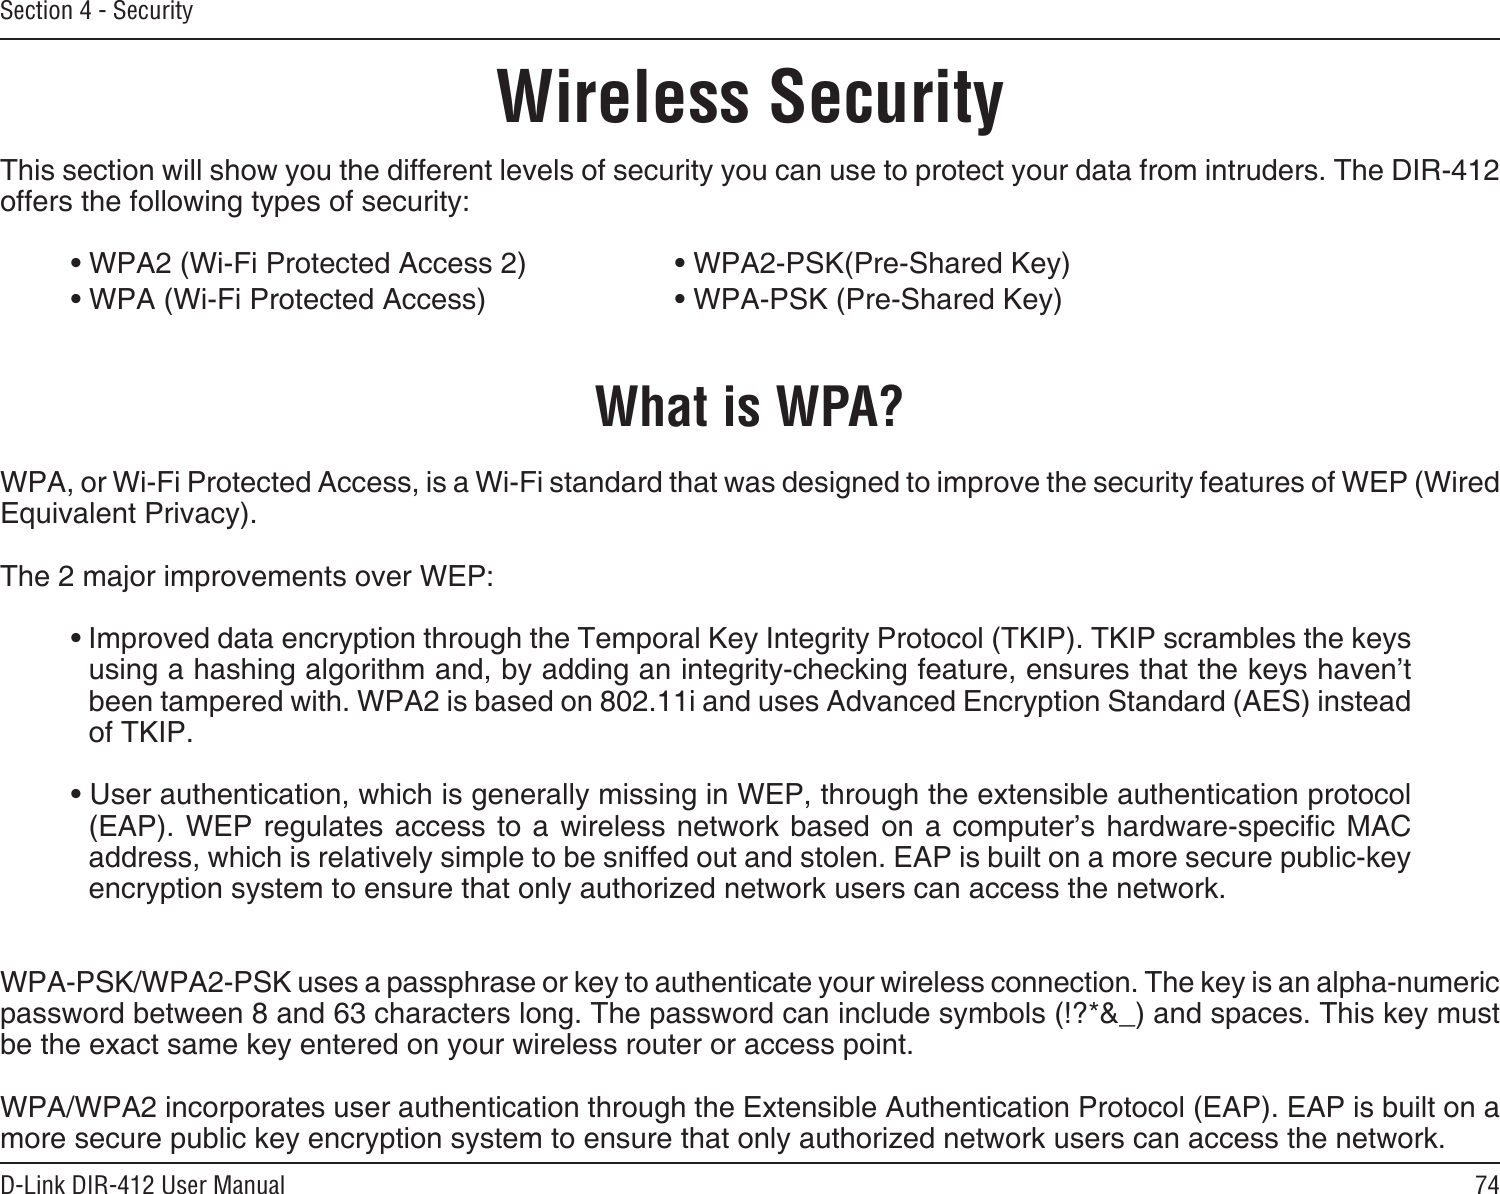 74D-Link DIR-412 User ManualSection 4 - SecurityWireless SecurityThis section will show you the different levels of security you can use to protect your data from intruders. The DIR-412 offers the following types of security:• WPA2 (Wi-Fi Protected Access 2)     • WPA2-PSK(Pre-Shared Key)• WPA (Wi-Fi Protected Access)      • WPA-PSK (Pre-Shared Key)What is WPA?WPA, or Wi-Fi Protected Access, is a Wi-Fi standard that was designed to improve the security features of WEP (Wired Equivalent Privacy).  The 2 major improvements over WEP: • Improved data encryption through the Temporal Key Integrity Protocol (TKIP). TKIP scrambles the keys using a hashing algorithm and, by adding an integrity-checking feature, ensures that the keys haven’t been tampered with. WPA2 is based on 802.11i and uses Advanced Encryption Standard (AES) instead of TKIP.• User authentication, which is generally missing in WEP, through the extensible authentication protocol (EAP). WEP  regulates  access to a wireless  network  based on a computer’s  hardware-specic  MAC address, which is relatively simple to be sniffed out and stolen. EAP is built on a more secure public-key encryption system to ensure that only authorized network users can access the network.WPA-PSK/WPA2-PSK uses a passphrase or key to authenticate your wireless connection. The key is an alpha-numeric password between 8 and 63 characters long. The password can include symbols (!?*&amp;_) and spaces. This key must be the exact same key entered on your wireless router or access point.WPA/WPA2 incorporates user authentication through the Extensible Authentication Protocol (EAP). EAP is built on a more secure public key encryption system to ensure that only authorized network users can access the network.